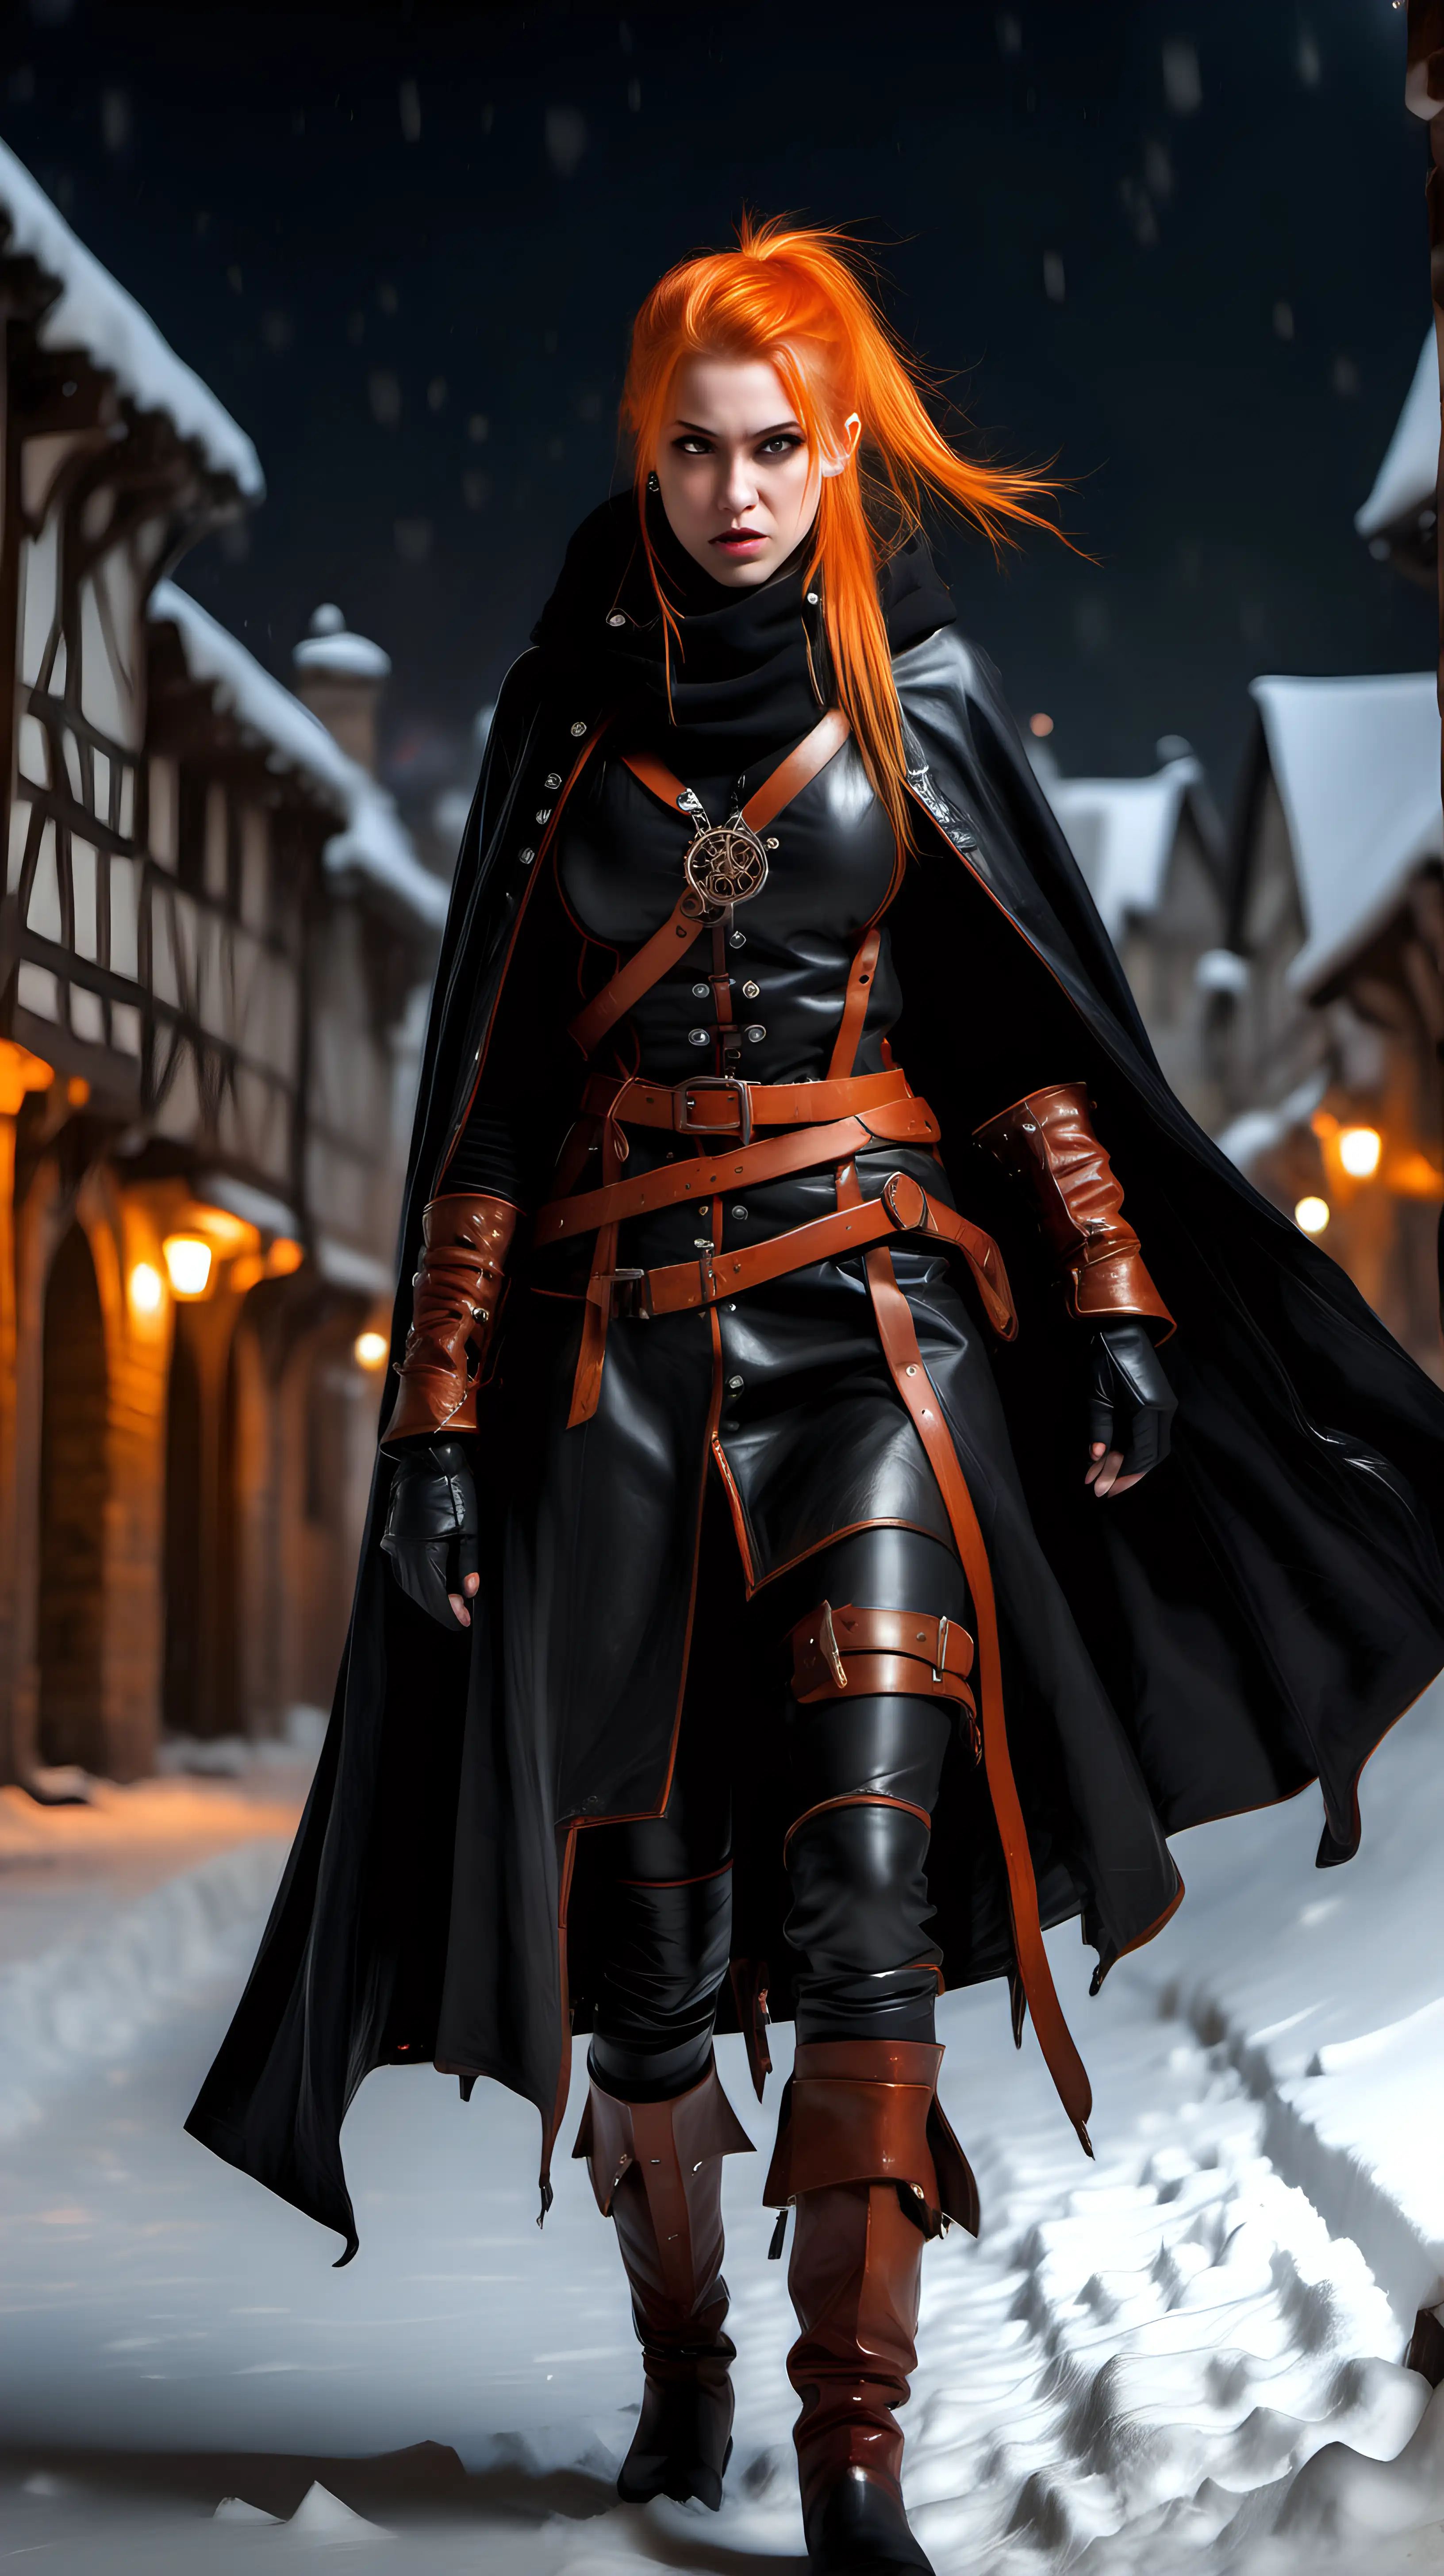 female rogue, angry expression, cute, strong,  brown, leather clothes, black leather boots, long black leather cloak, amulet necklace, small stud earrings, orange jewels, bright orange hair, ponytail, walking, medieval fantasy, medieval city exterior, heavy snow, very cold, night time, full-body photo, super-detailed, hyper-realistic